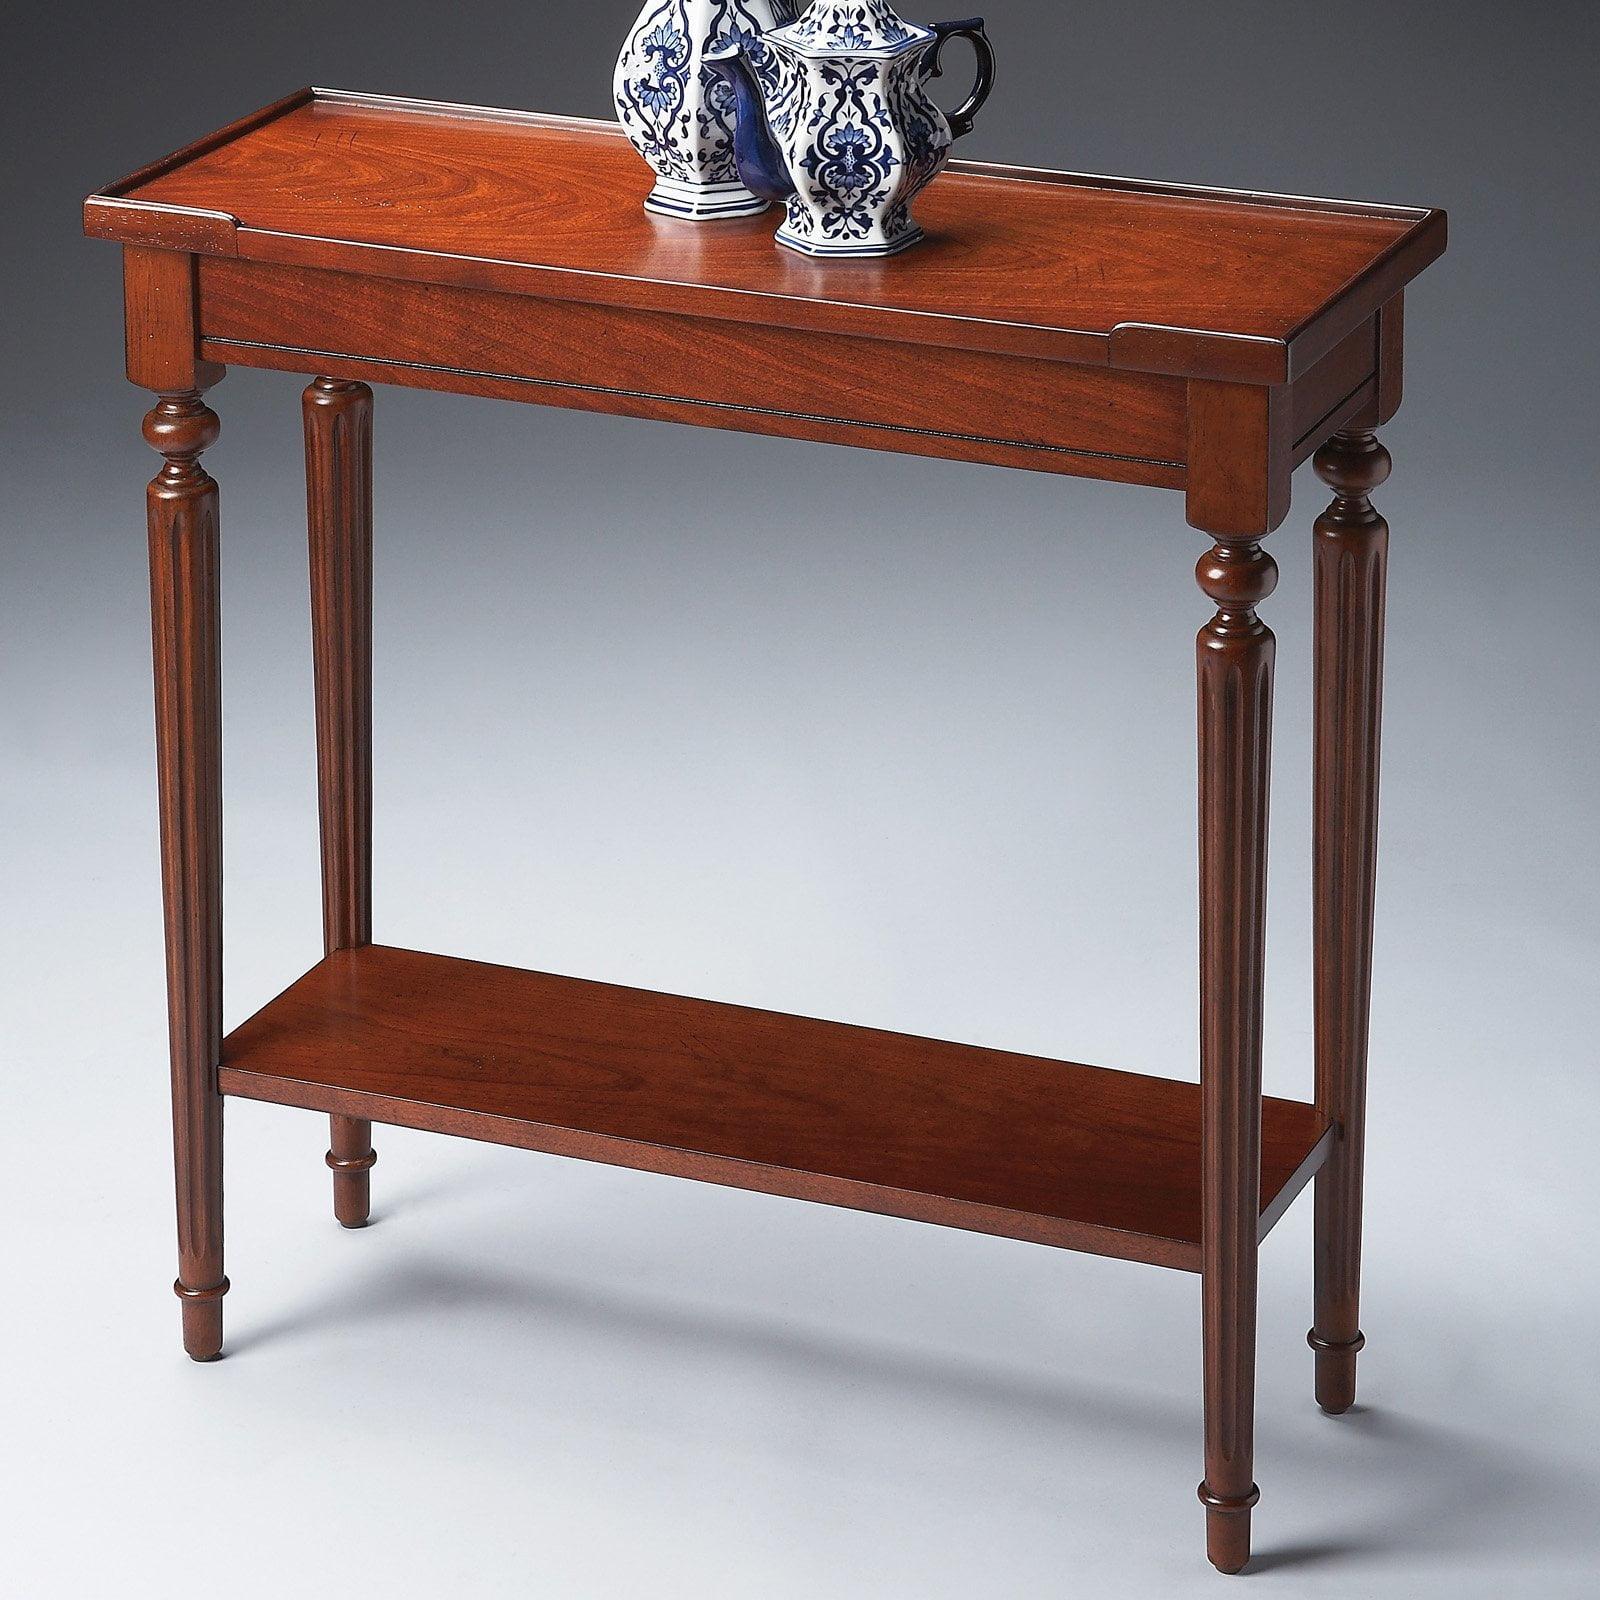 Plantation Cherry Solid Wood Console Table with Storage Shelf